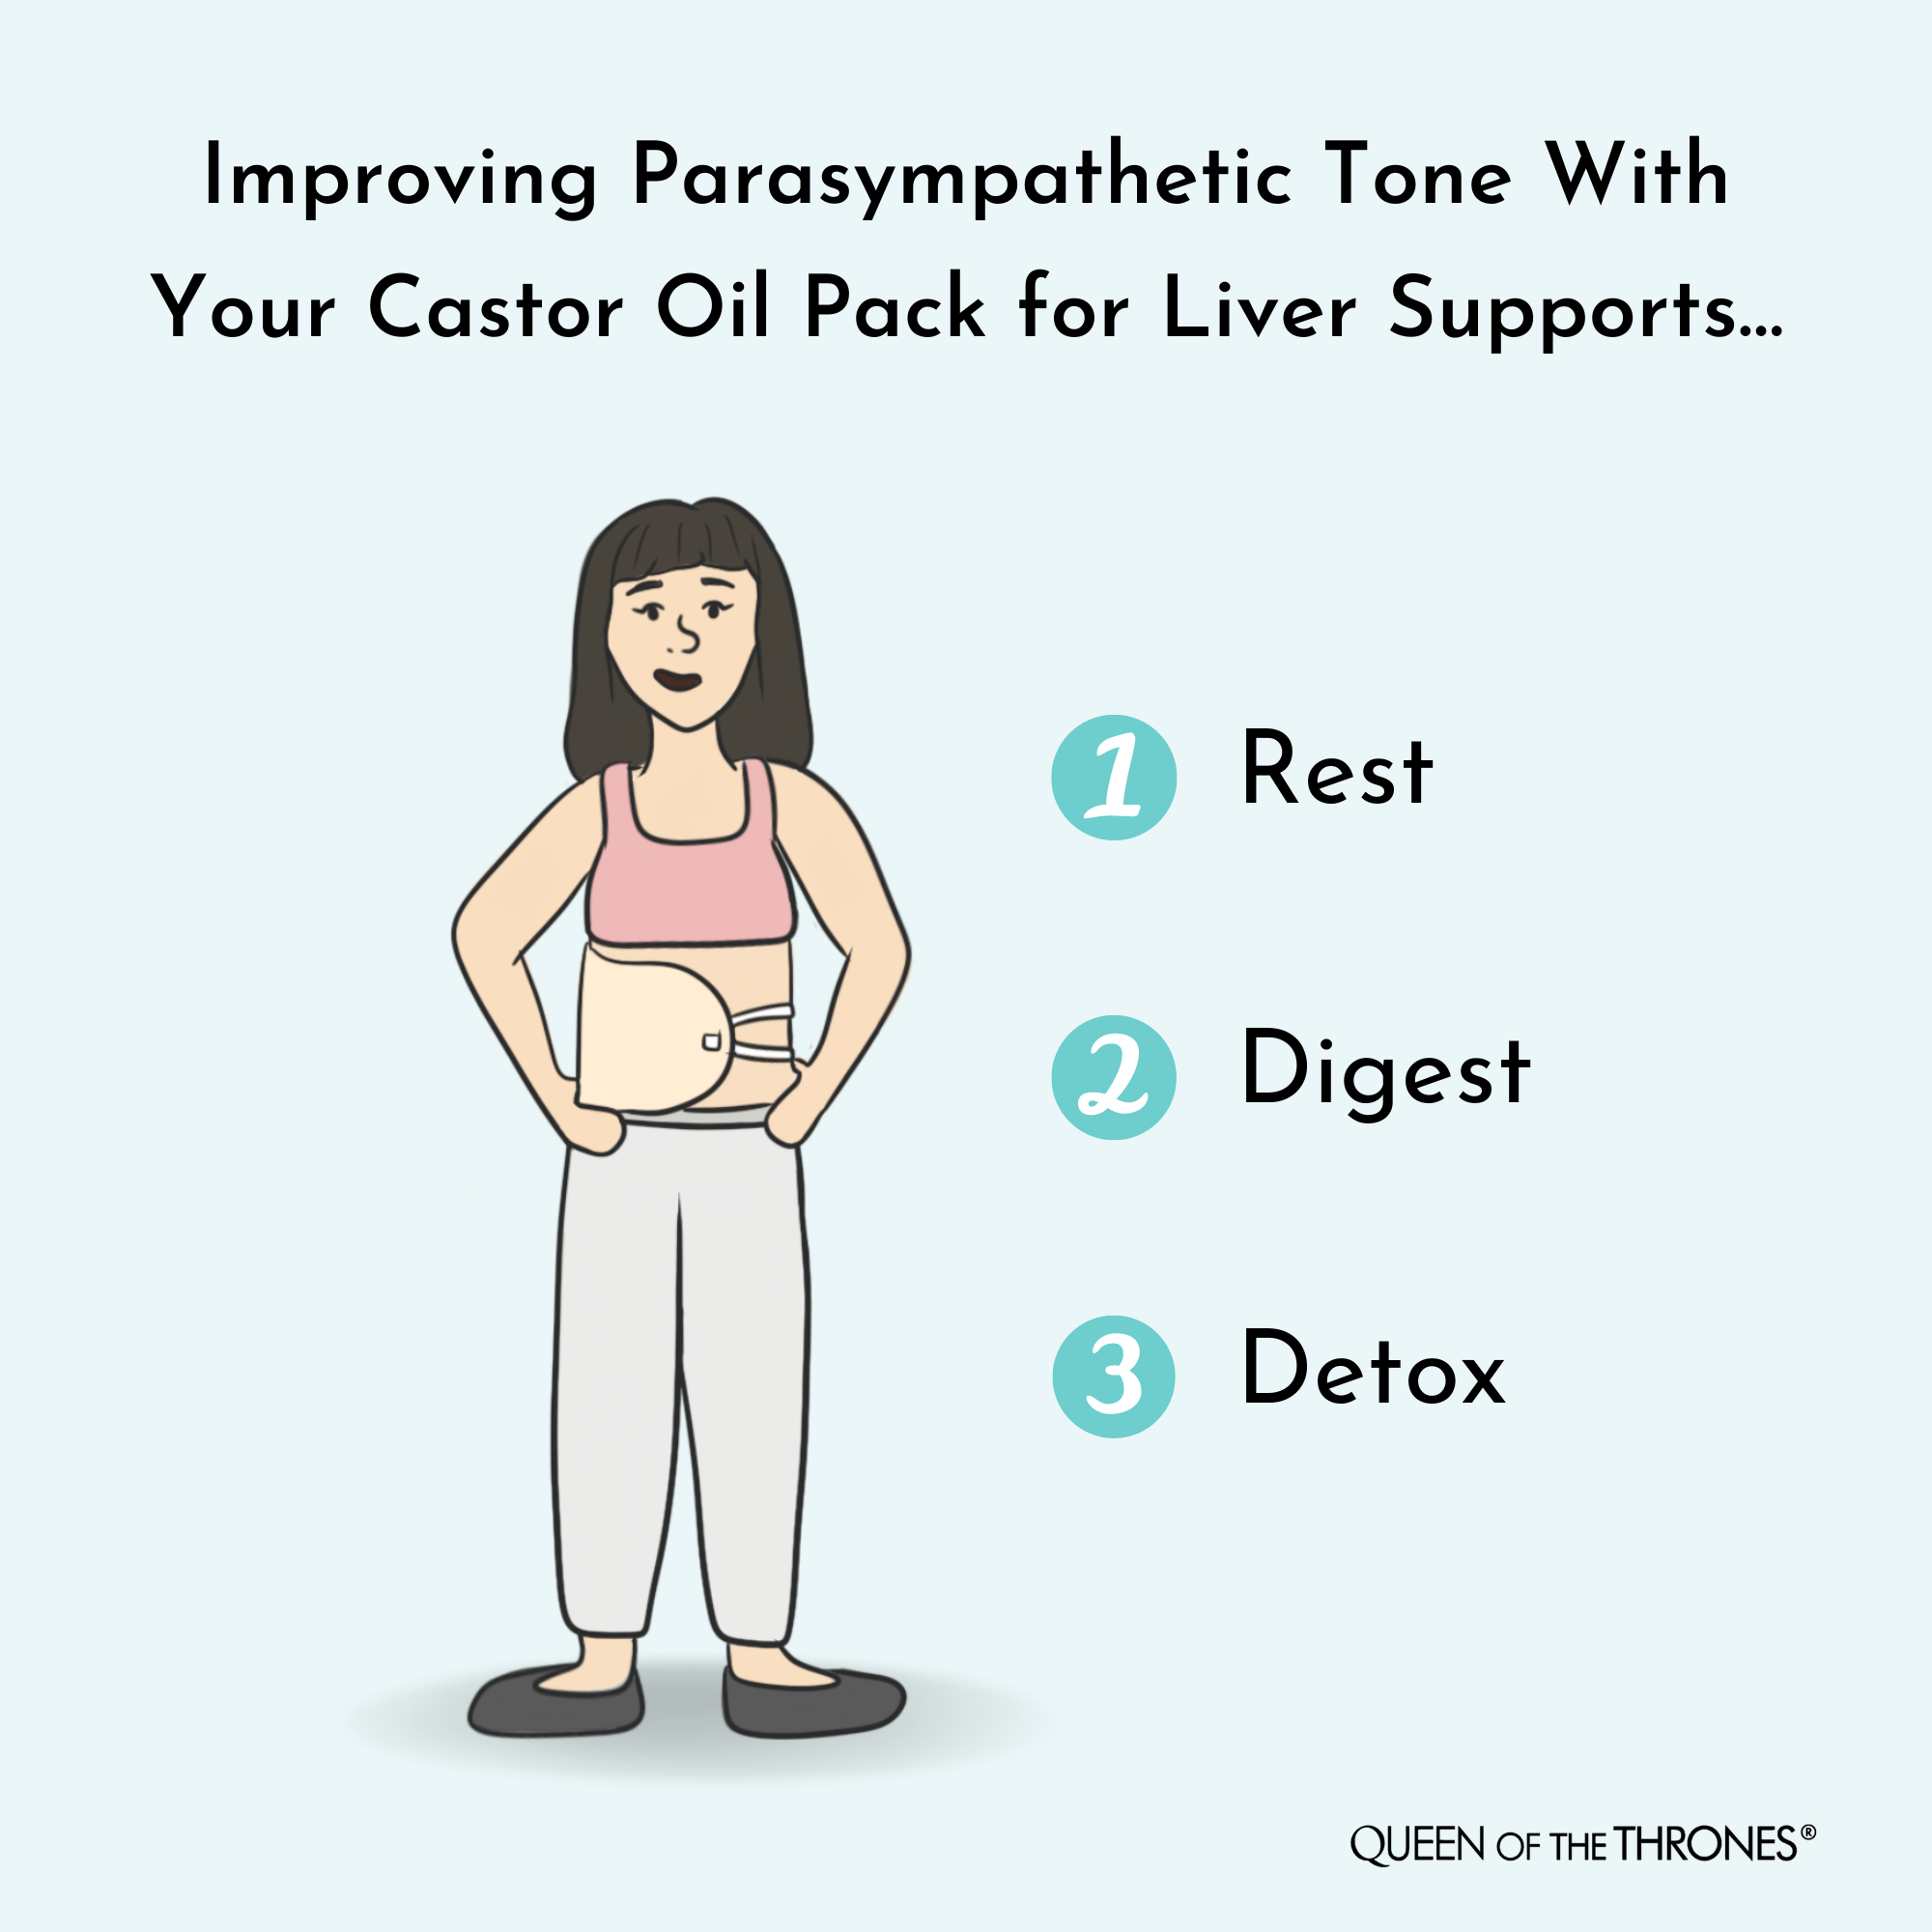 Queen of the Thrones Castor Oil Packs supports digestion and detox